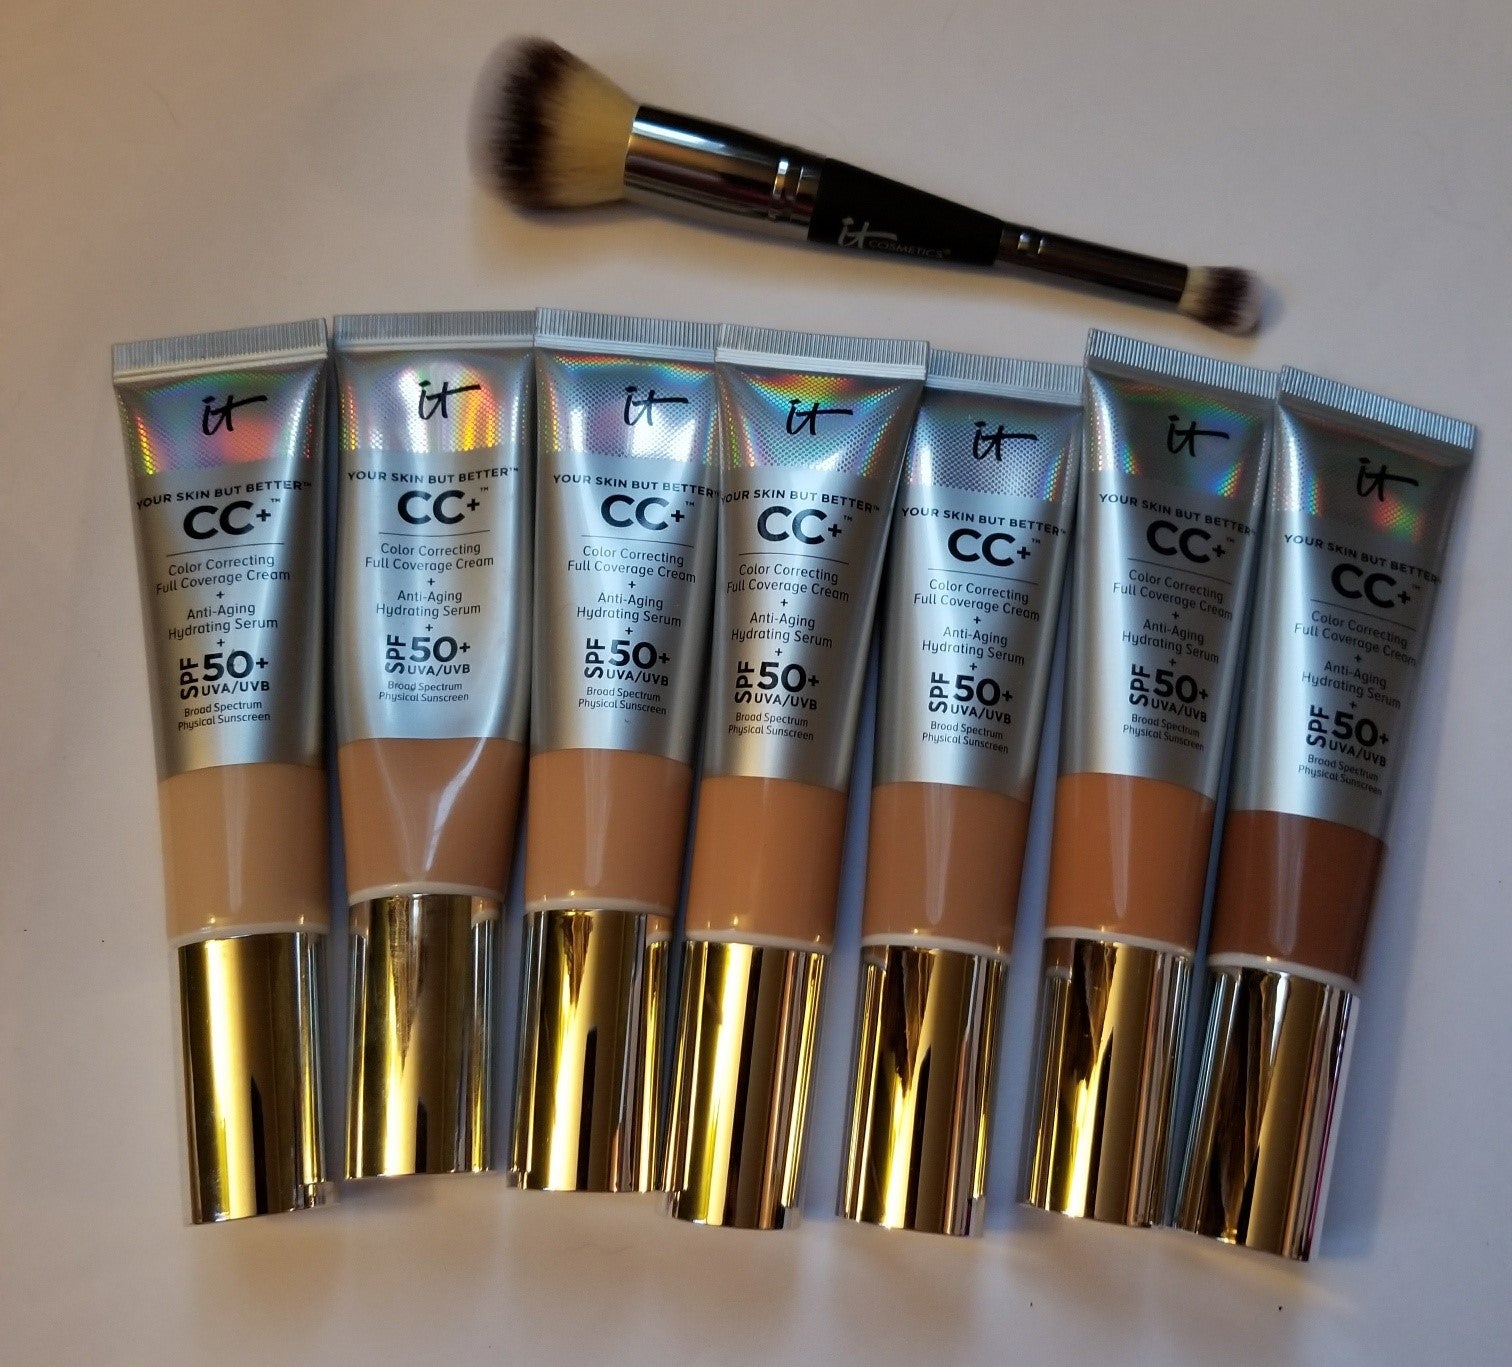 Review, Photos, Swatches, Makeup Trend 2017, 2018, 2019: It Cosmetics Heavenly Luxe Complexion Perfection Brush #7, Your Skin But Better CC Cream with SPF 50+